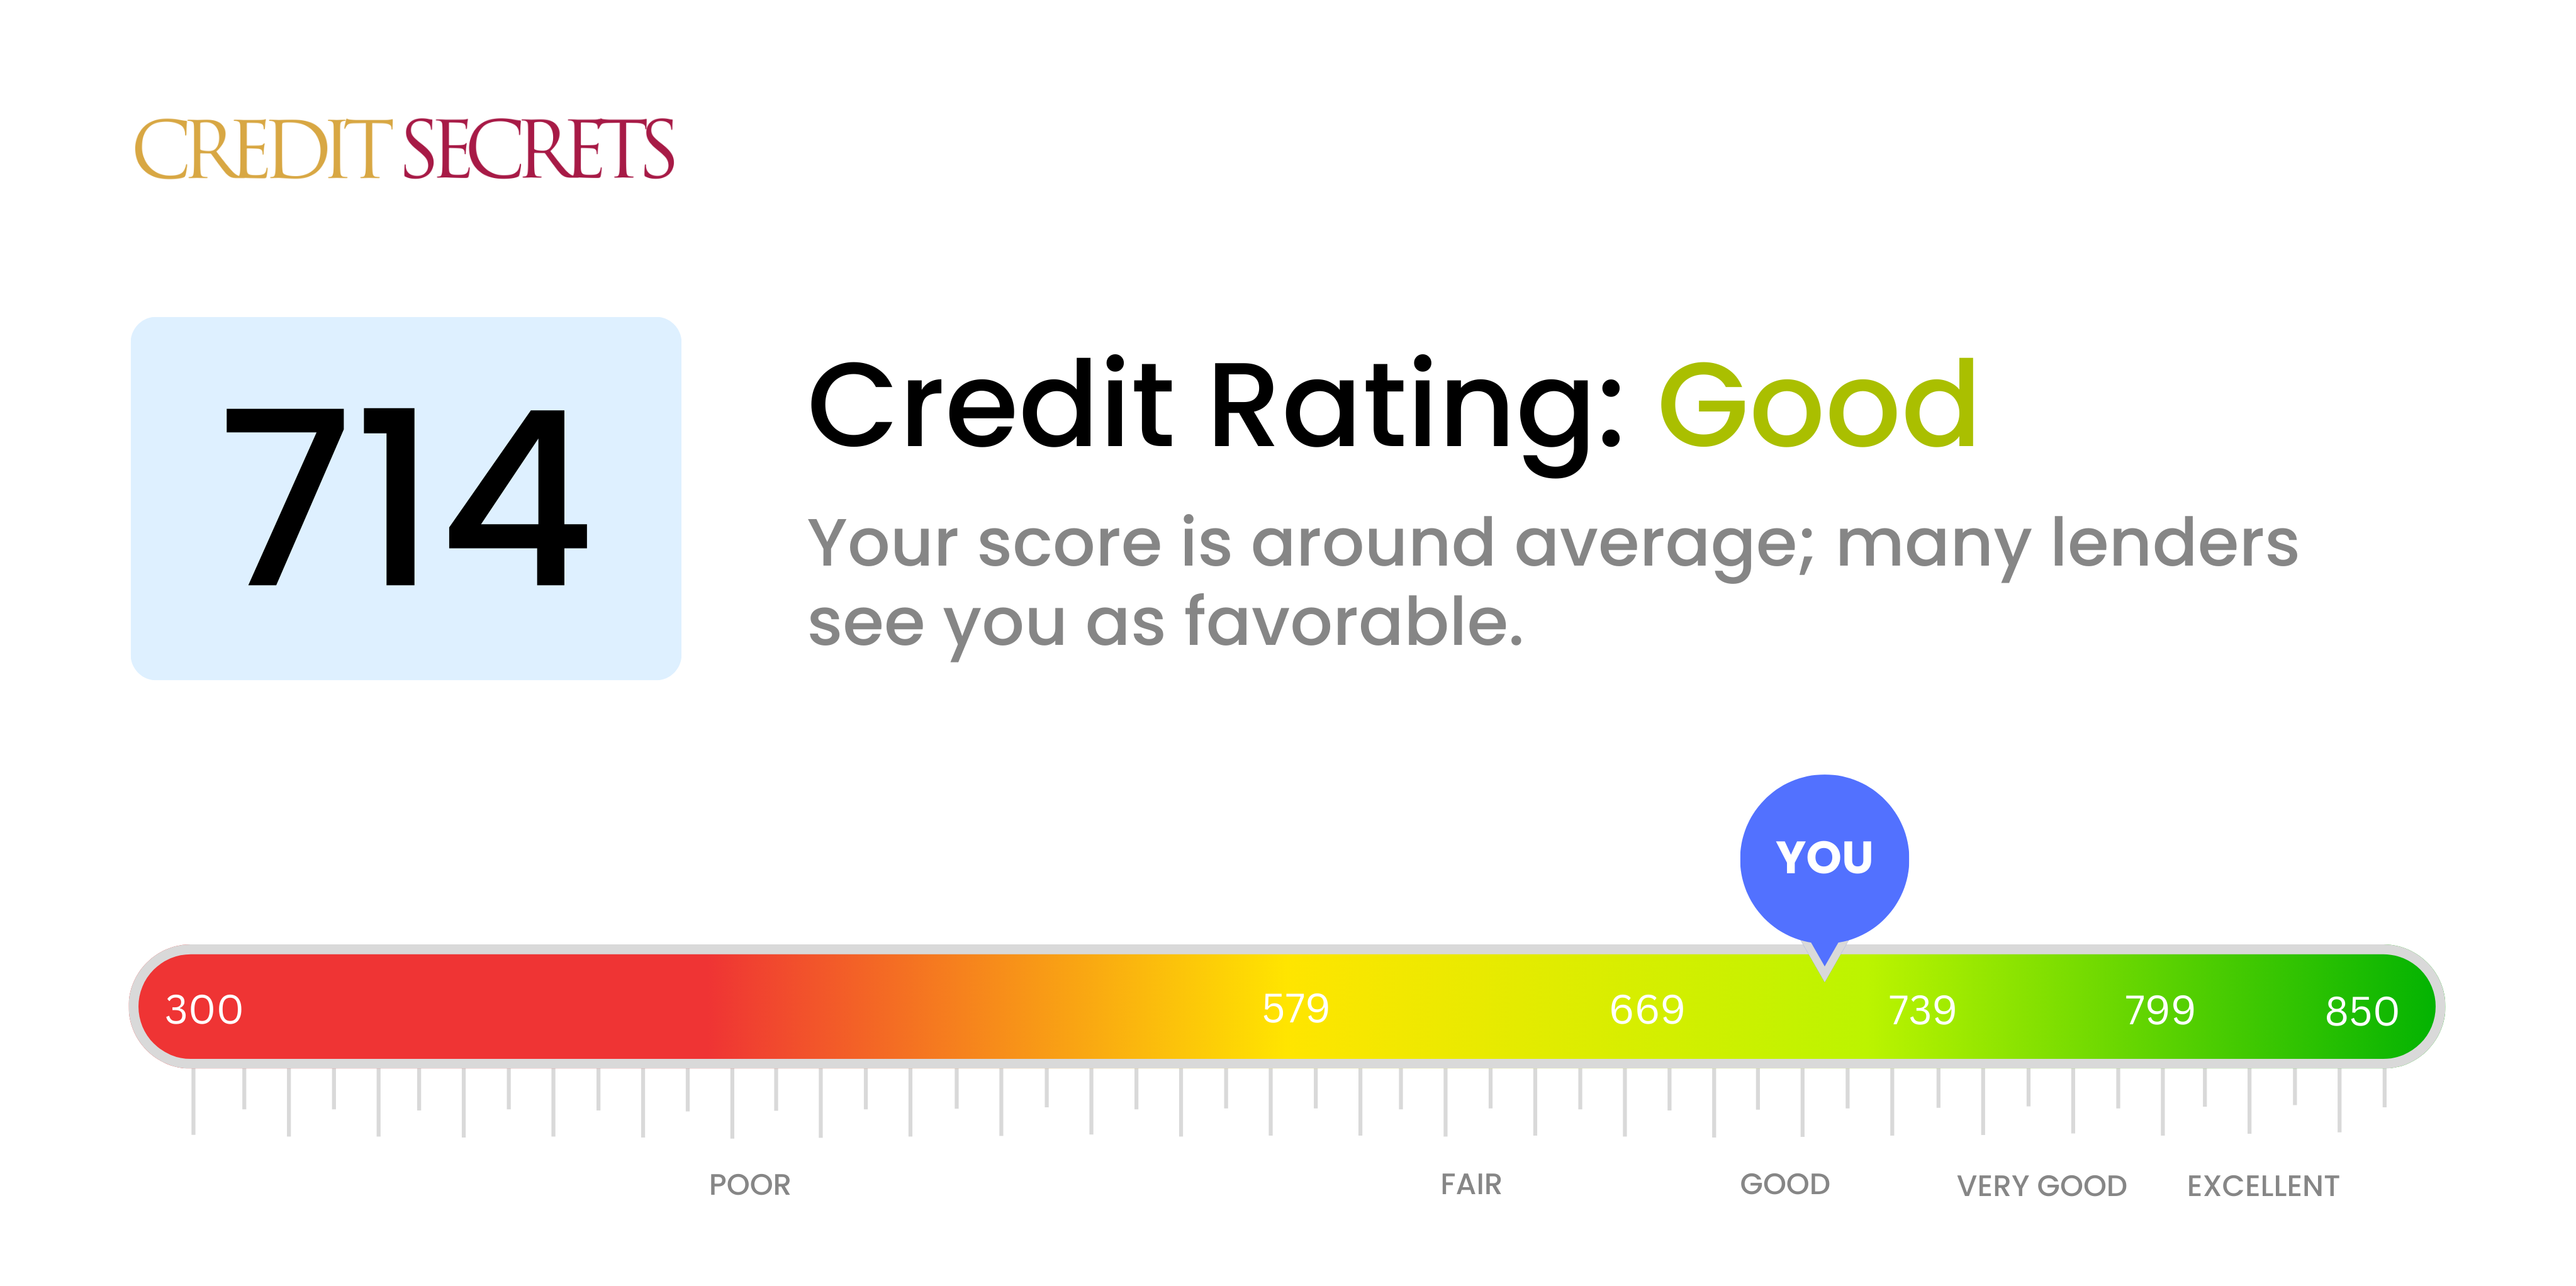 Is 714 a good credit score?